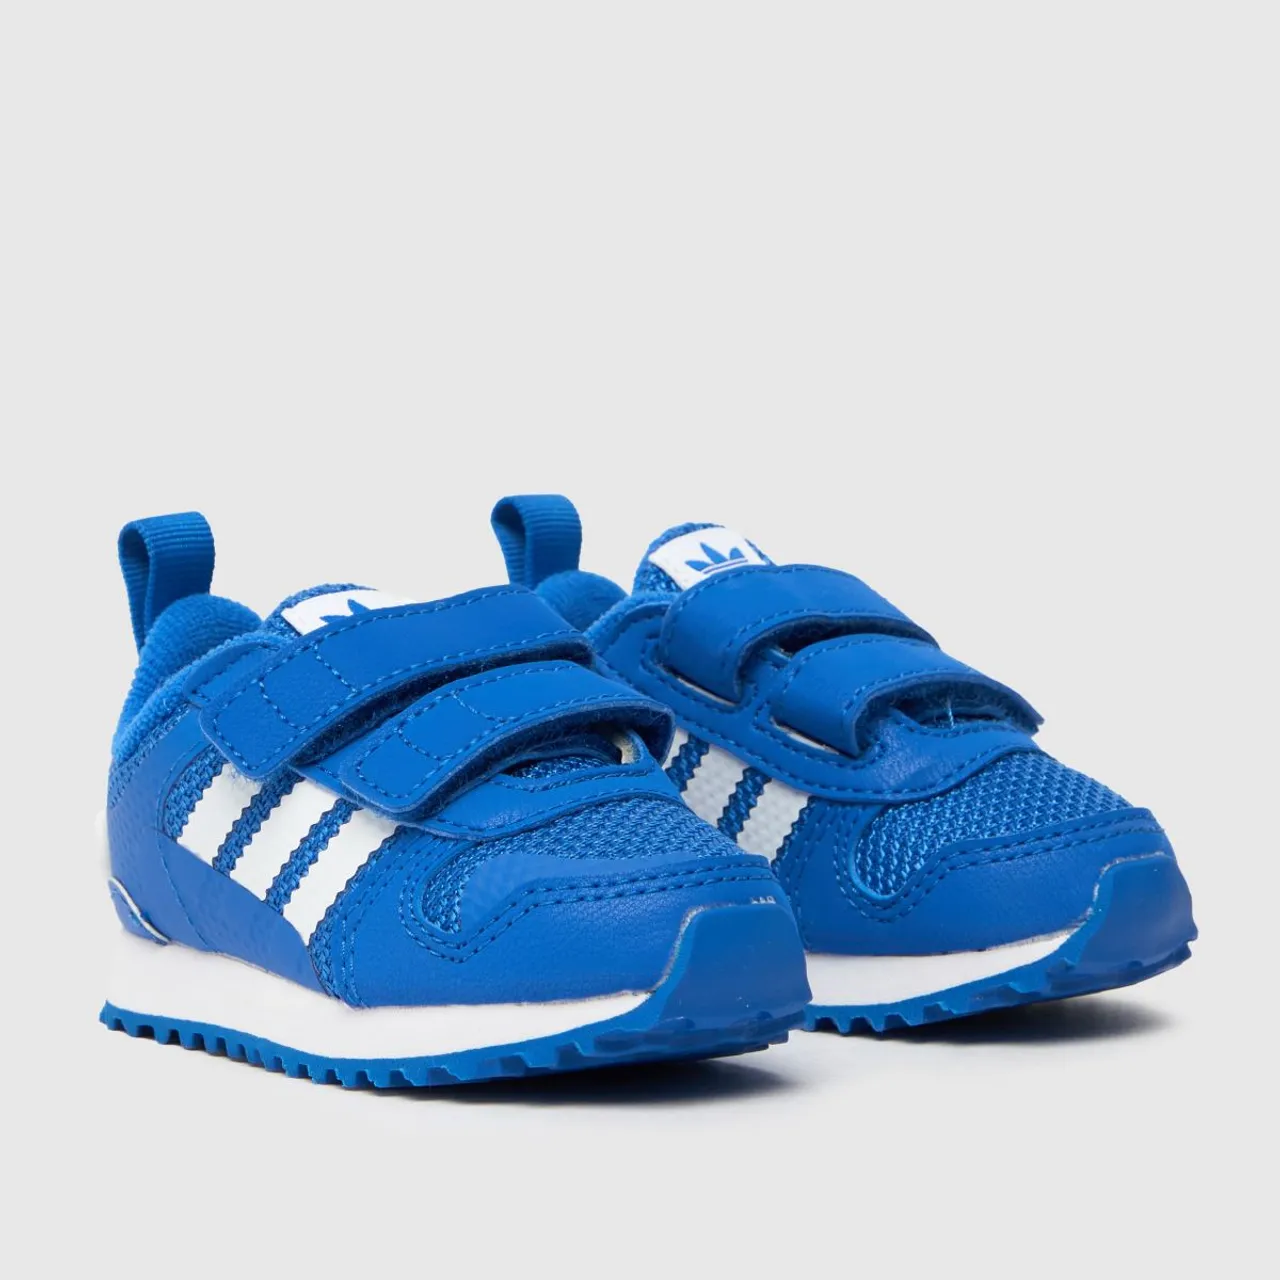 Adidas Blue Zx 700 Hd Boys Toddler Trainers